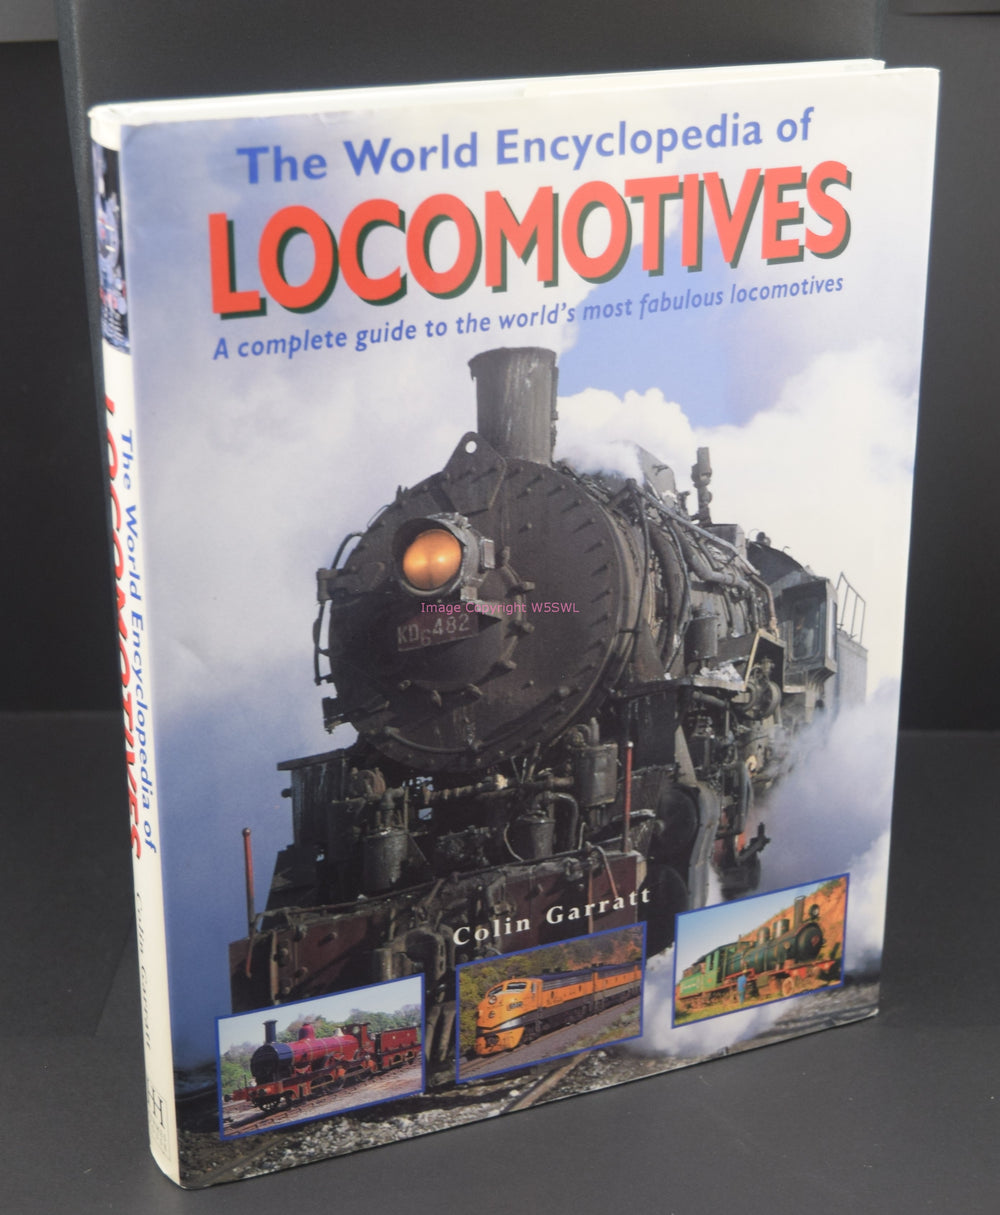 The World Encyclopedia of Locomotives by Colin Garratt - Dave's Hobby Shop by W5SWL